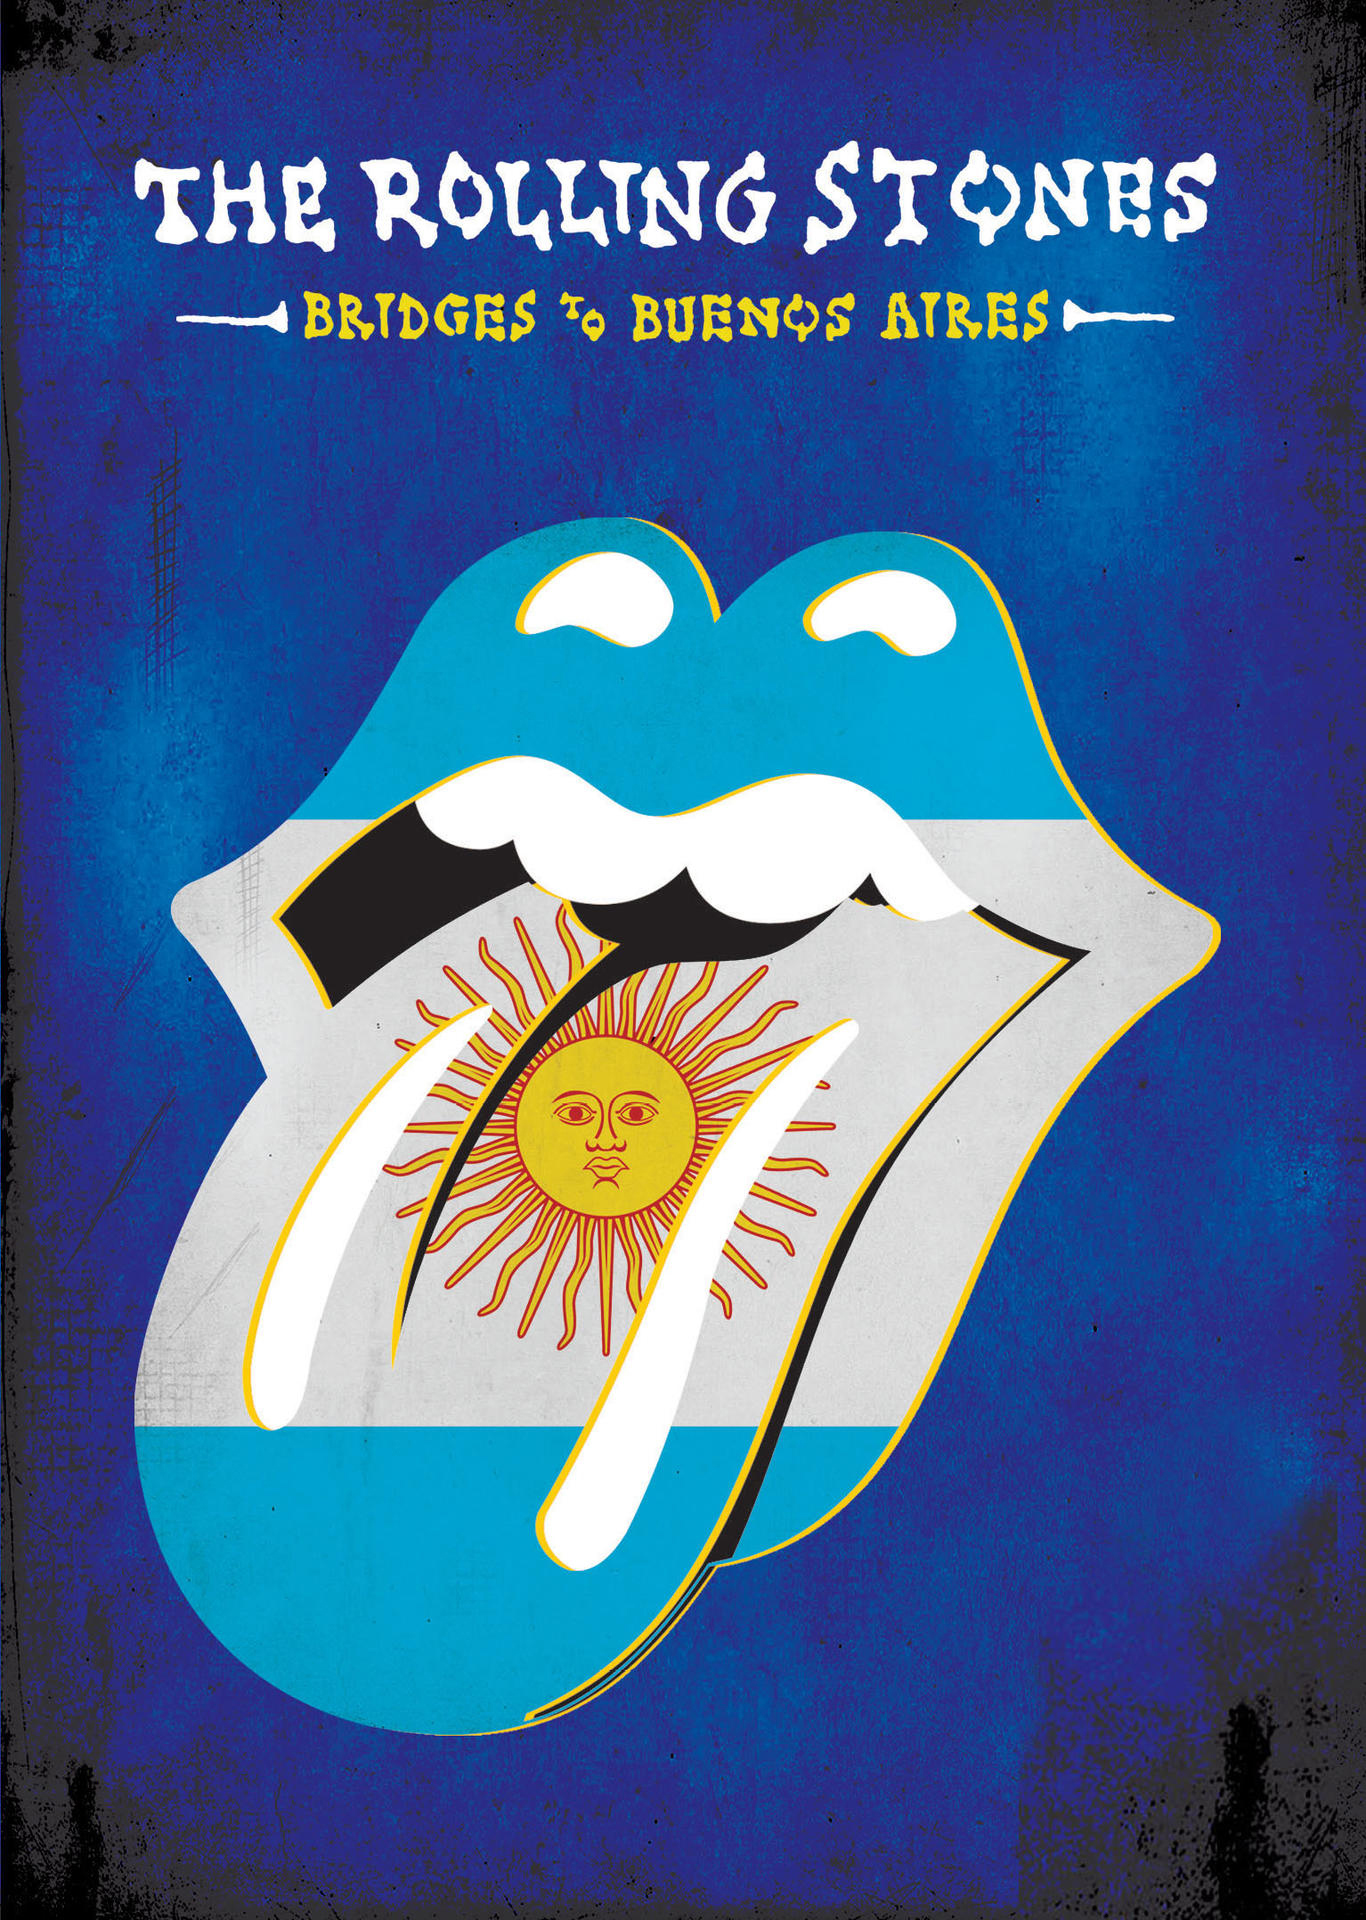 (CD - To Blu-ray Aires + Buenos Rolling Disc) Stones - Bridges The